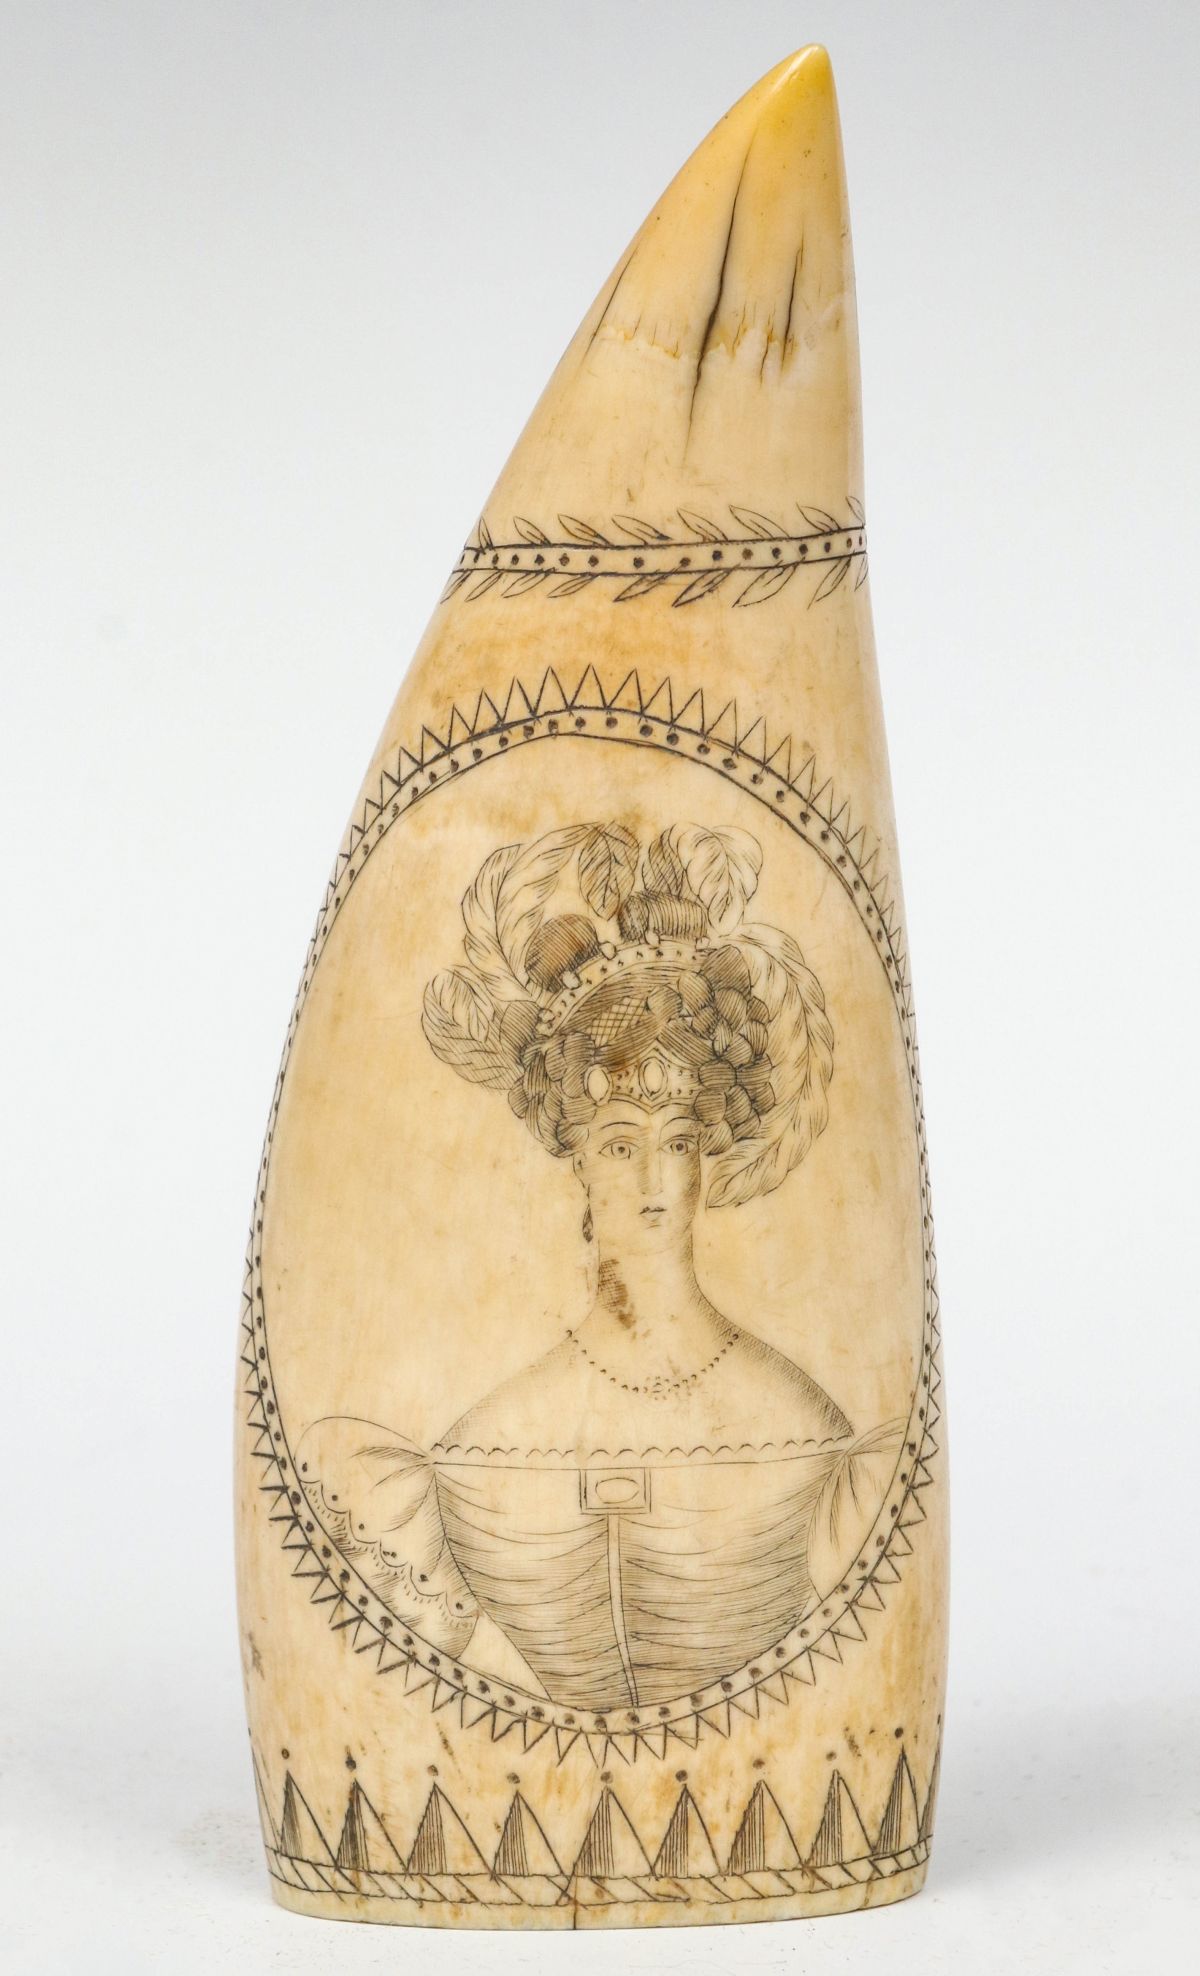 A VERY GOOD EARLY 19TH CENTURY SCRIMSHAW WHALE'S TOOTH